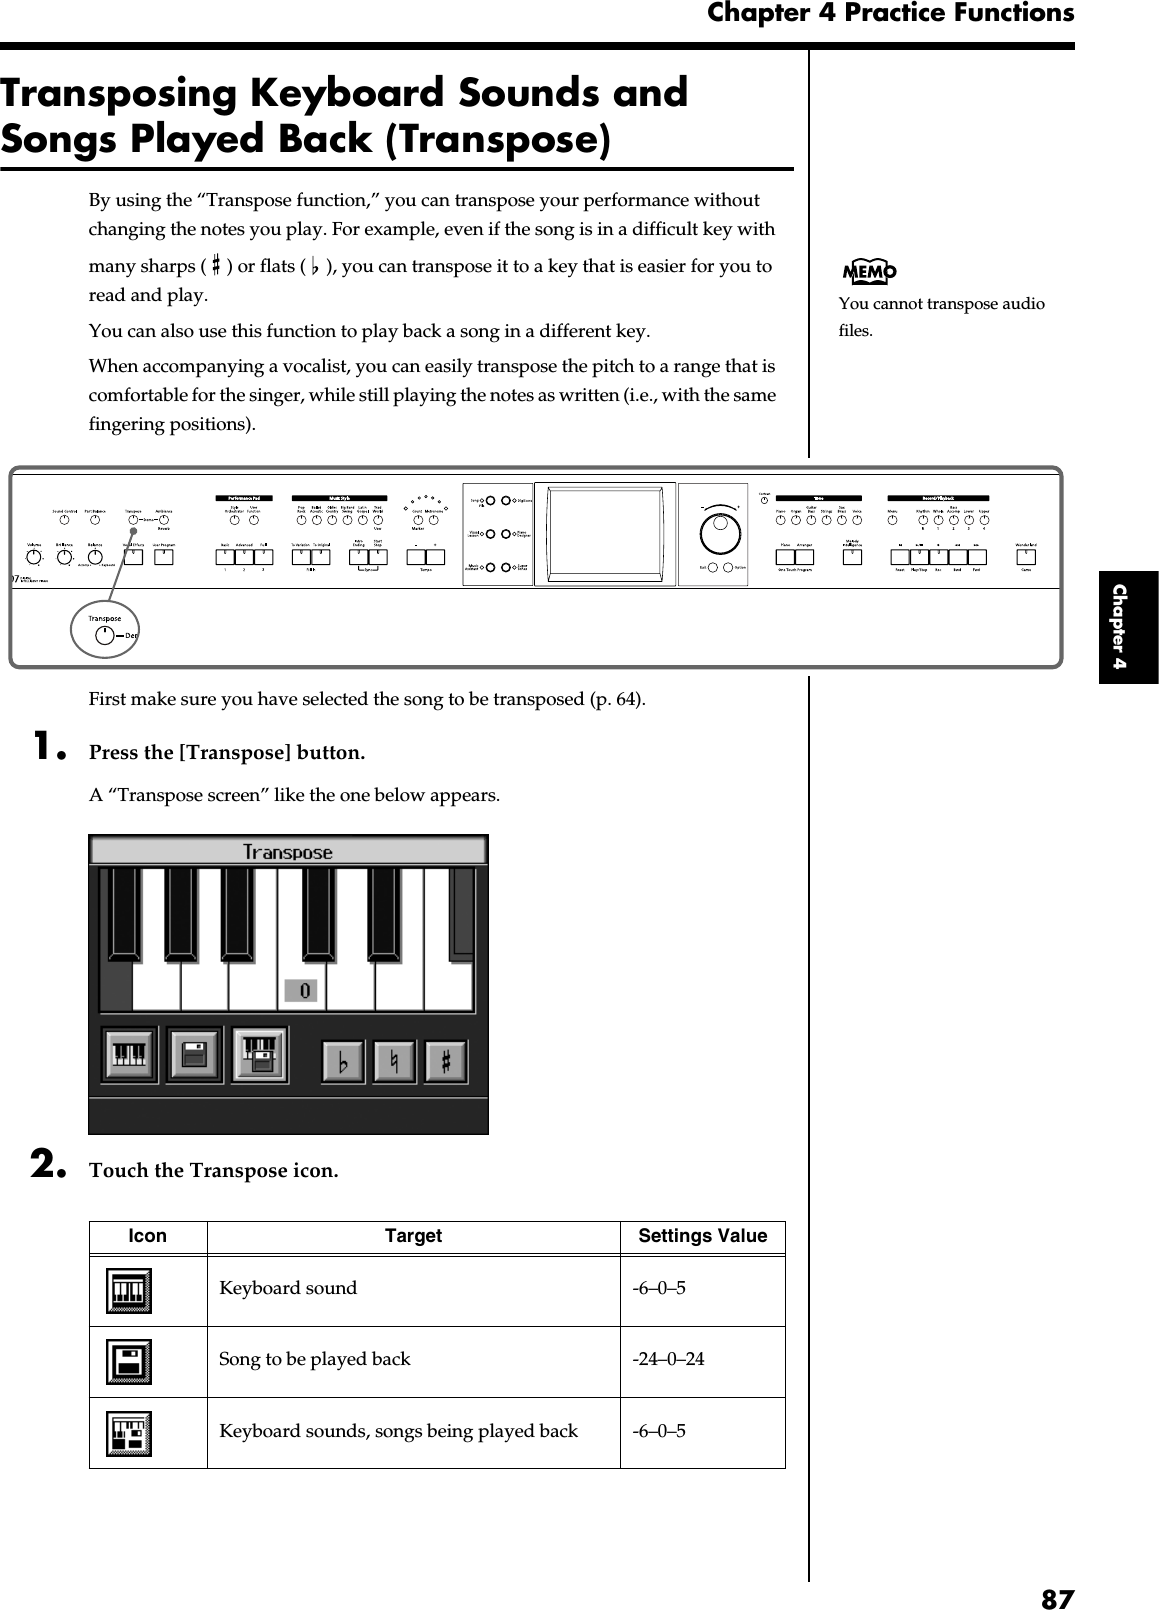 87Chapter 4 Practice FunctionsChapter 4Transposing Keyboard Sounds and Songs Played Back (Transpose)By using the “Transpose function,” you can transpose your performance without changing the notes you play. For example, even if the song is in a difficult key with many sharps ( ) or flats ( ), you can transpose it to a key that is easier for you to read and play.You can also use this function to play back a song in a different key.When accompanying a vocalist, you can easily transpose the pitch to a range that is comfortable for the singer, while still playing the notes as written (i.e., with the same fingering positions).fig.panel3-4First make sure you have selected the song to be transposed (p. 64).1. Press the [Transpose] button.A “Transpose screen” like the one below appears.fig.d-transpose.eps_602. Touch the Transpose icon.Icon Target Settings ValueKeyboard sound -6–0–5Song to be played back -24–0–24Keyboard sounds, songs being played back -6–0–5You cannot transpose audio files.